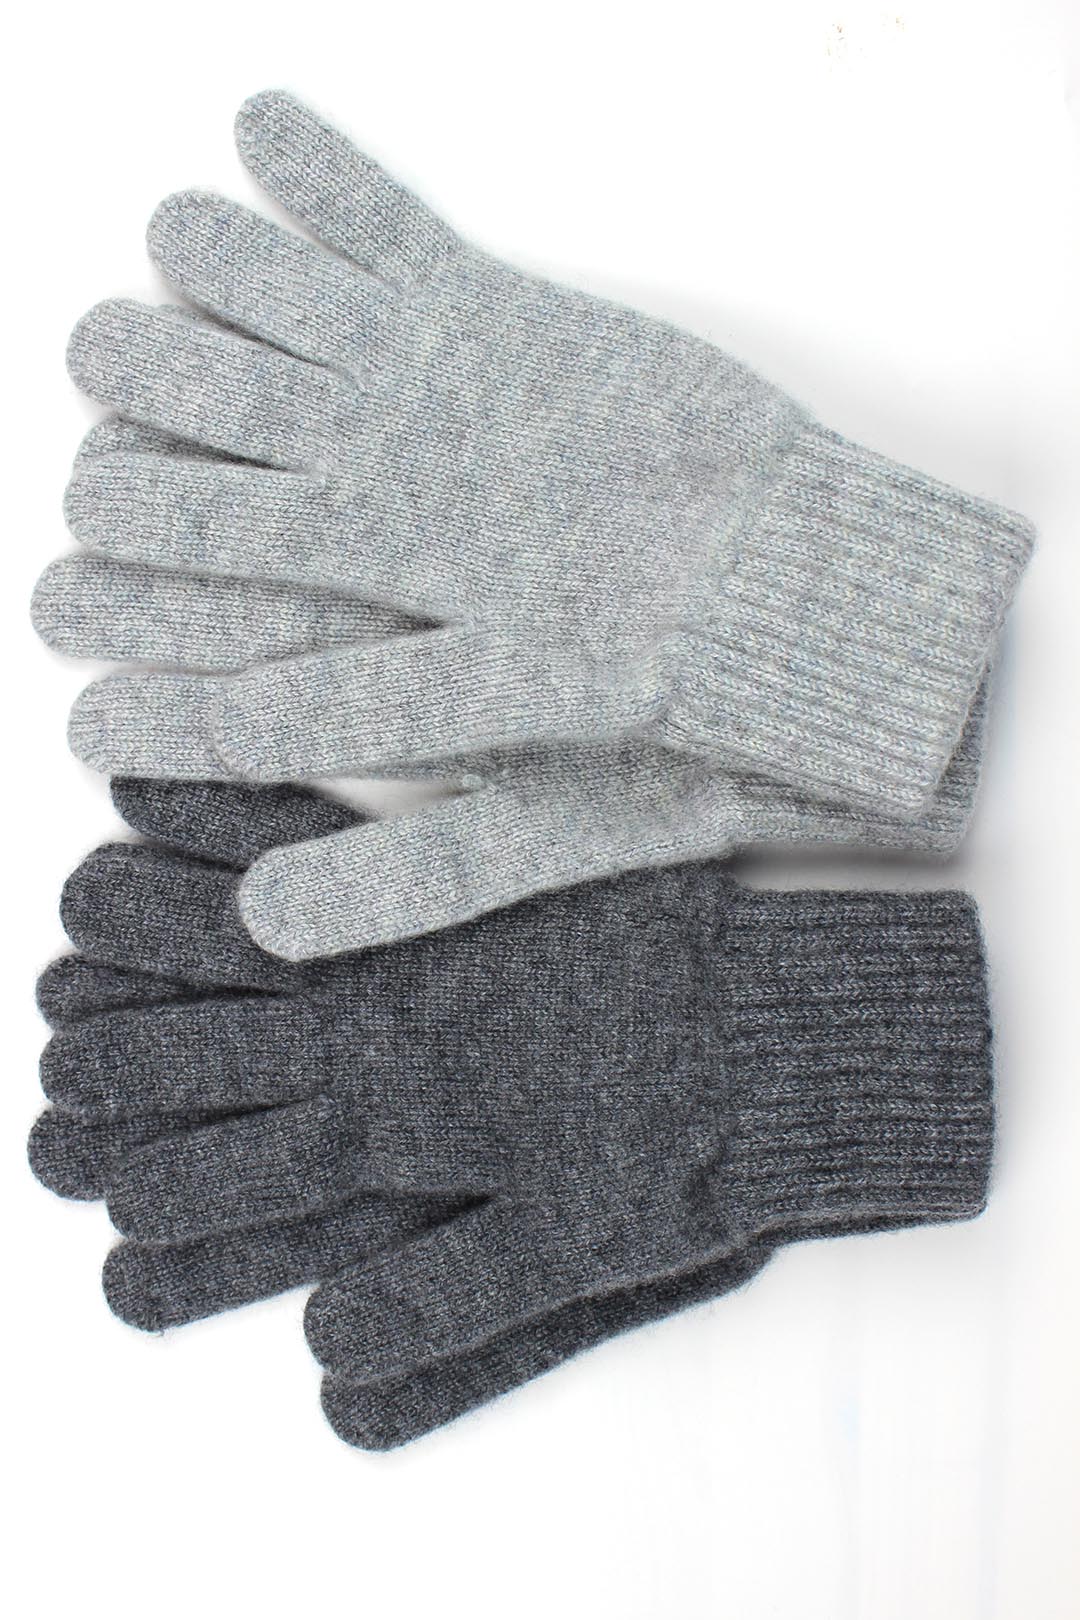 Cashmere gloves in greys. Knitted in the Scottish borders